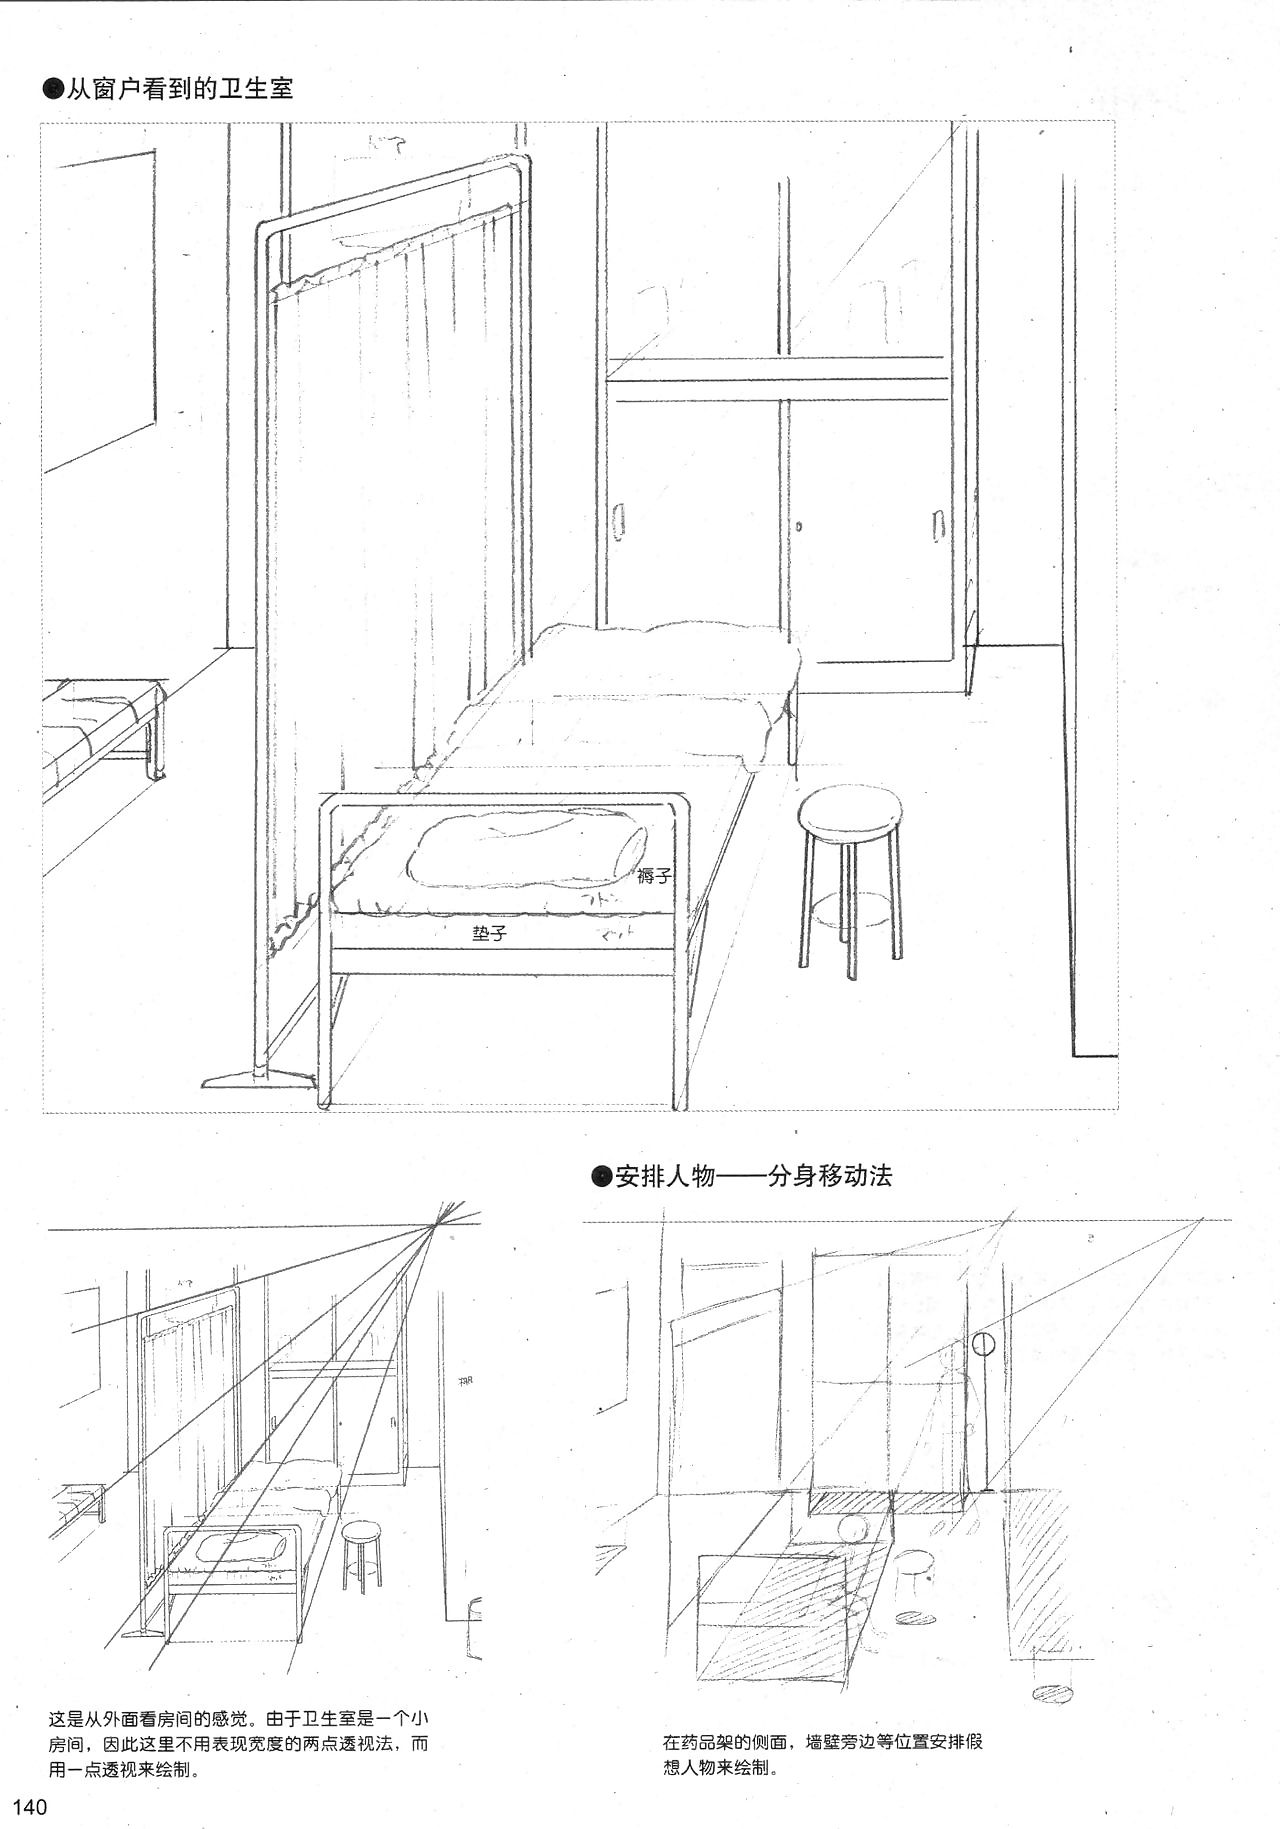 How to Draw Manga: Sketching Manga-Style Volume 4: All About Perspective - part 8